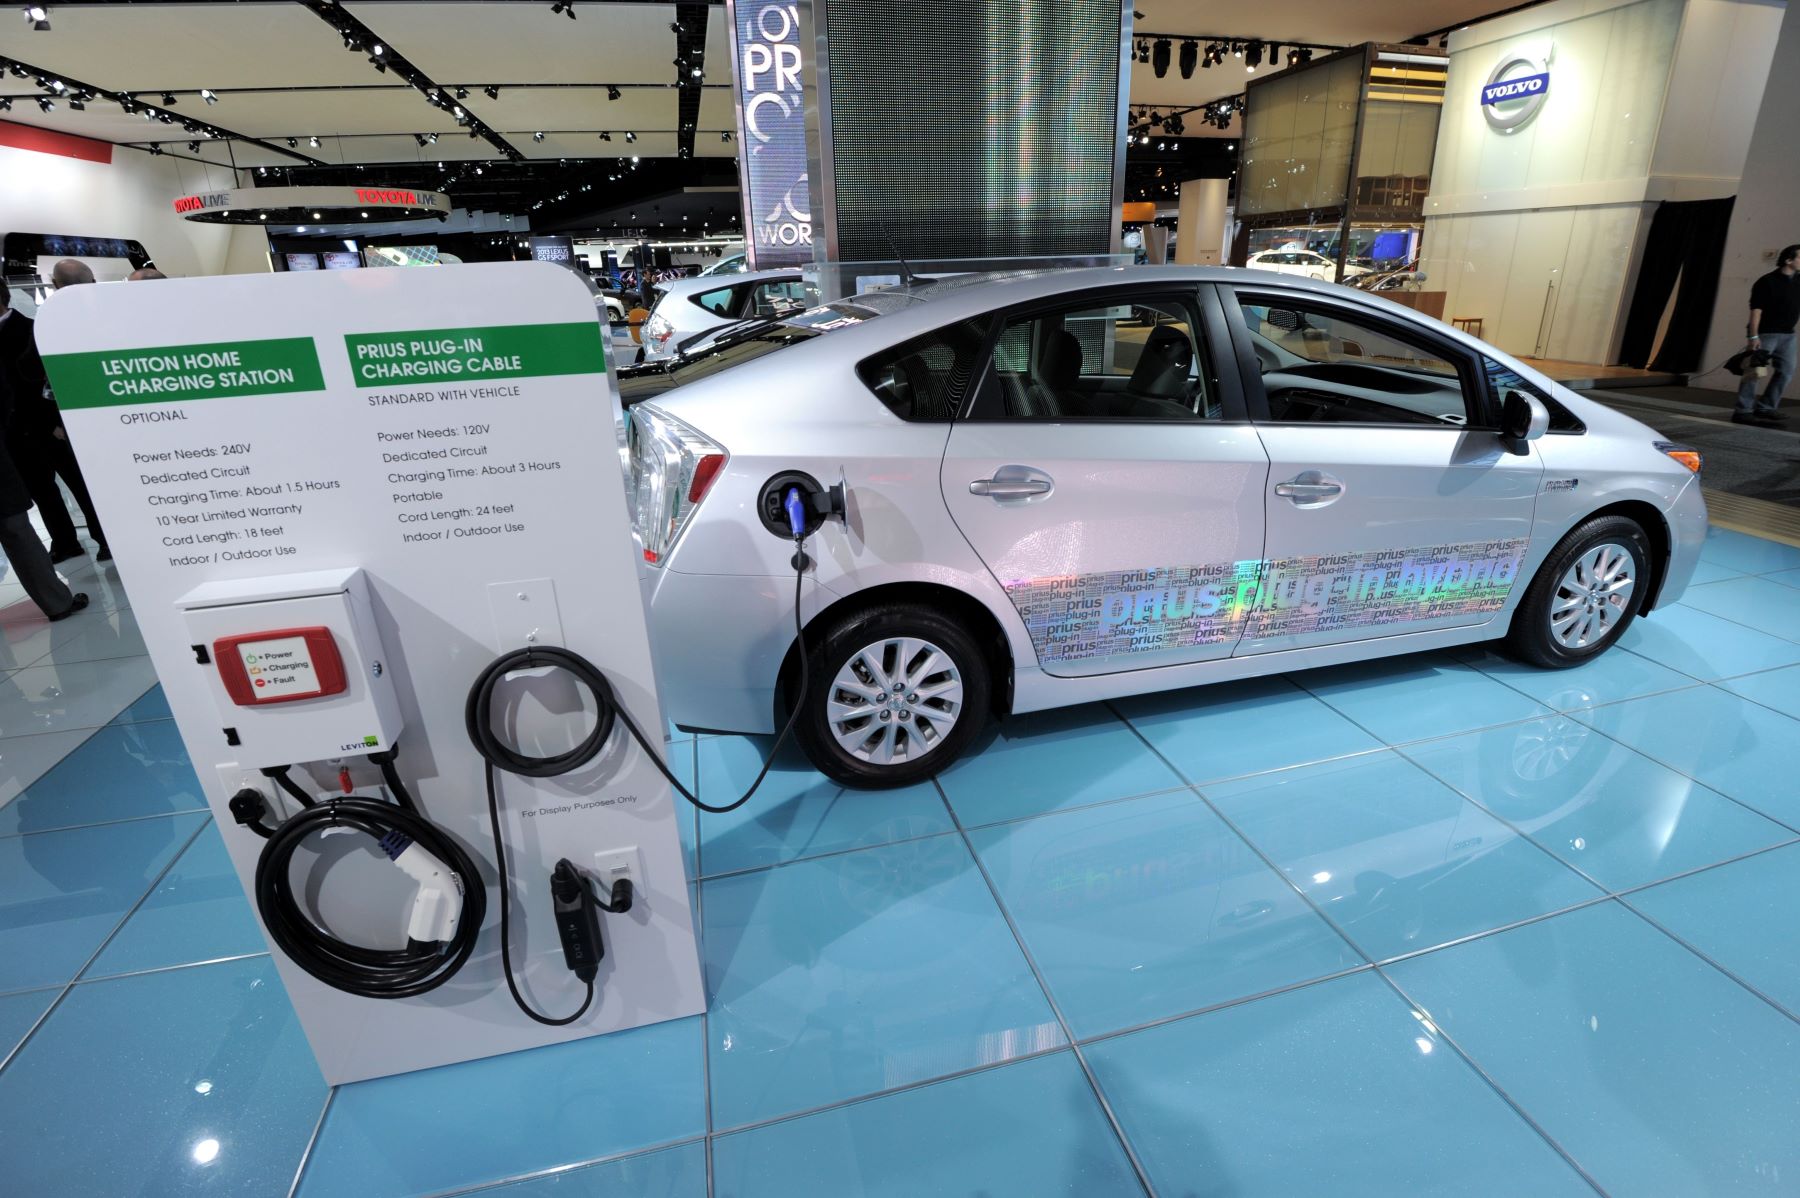 A Toyota Prius plug-in hybrid electric vehicle model on display with a home charging station and charging cable options